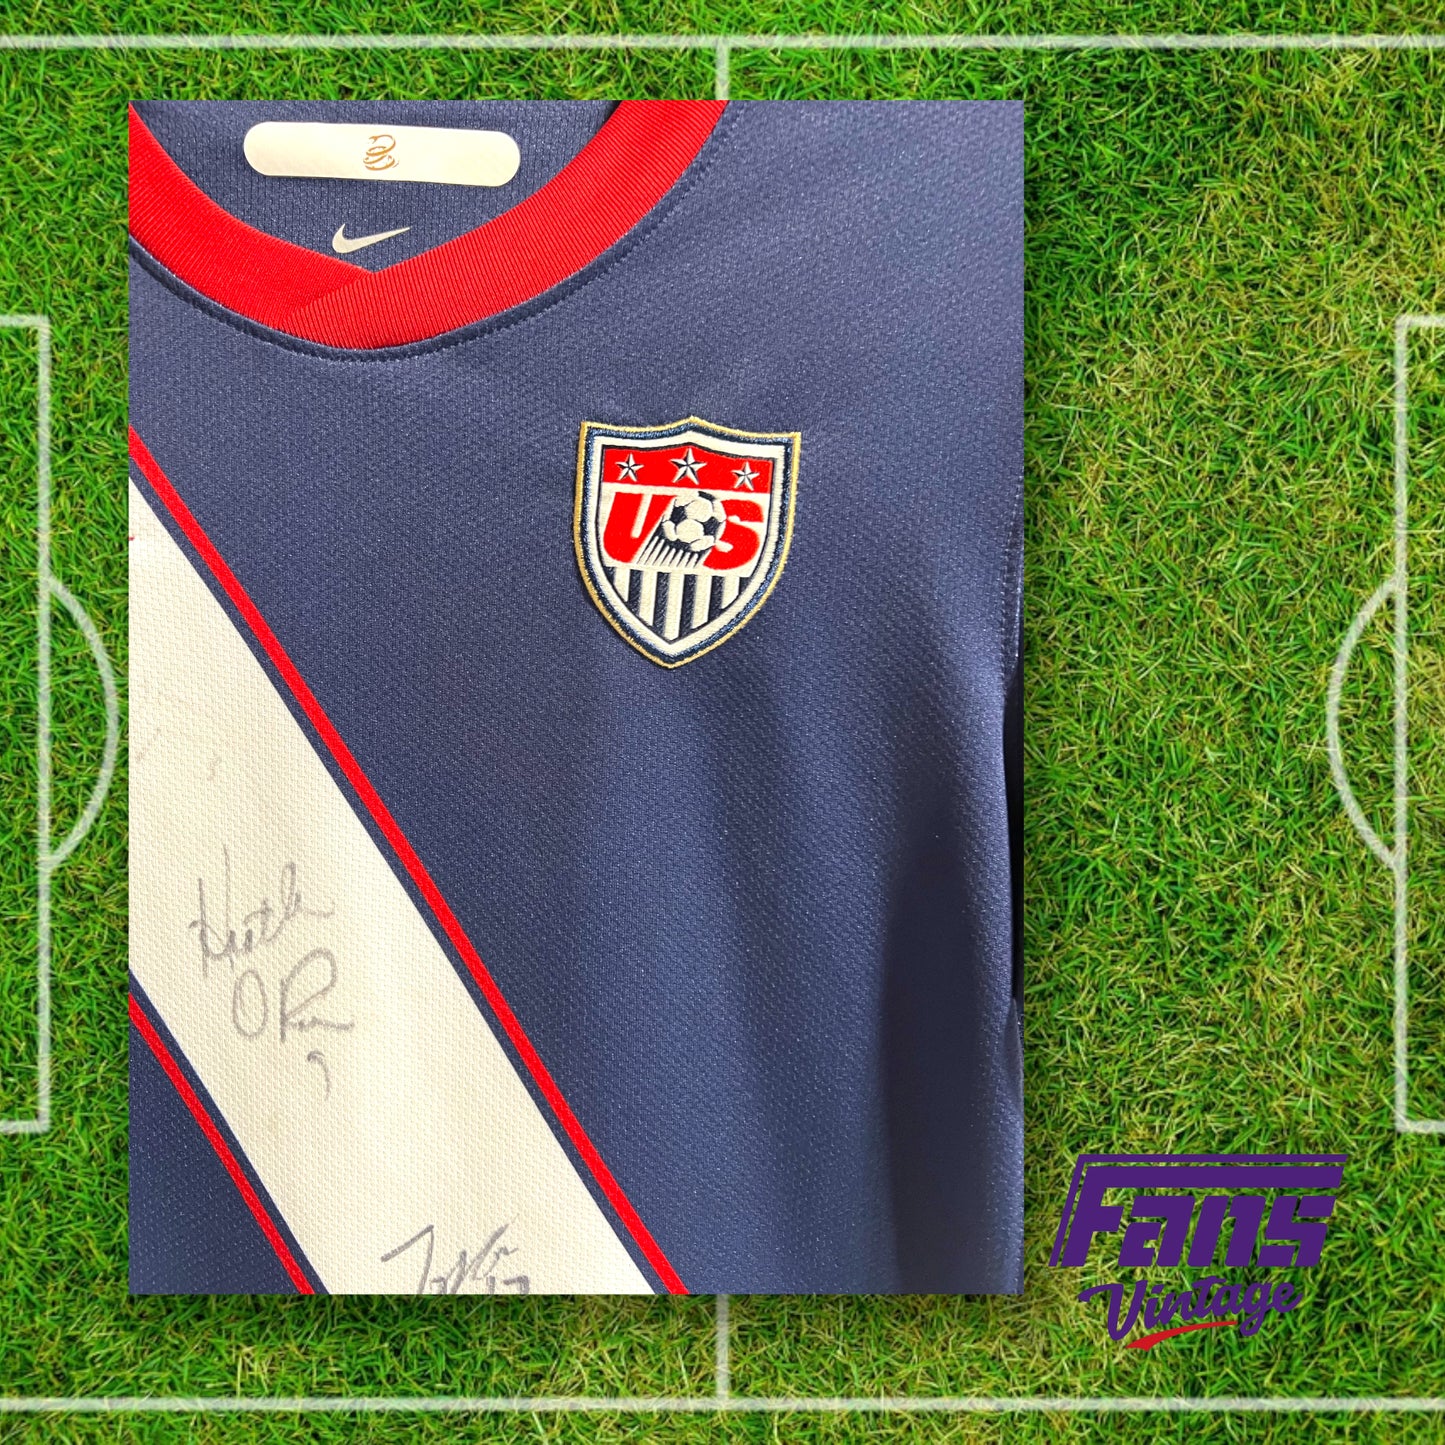 2010 USWNT 'Don't Tread on Me' autographed jersey